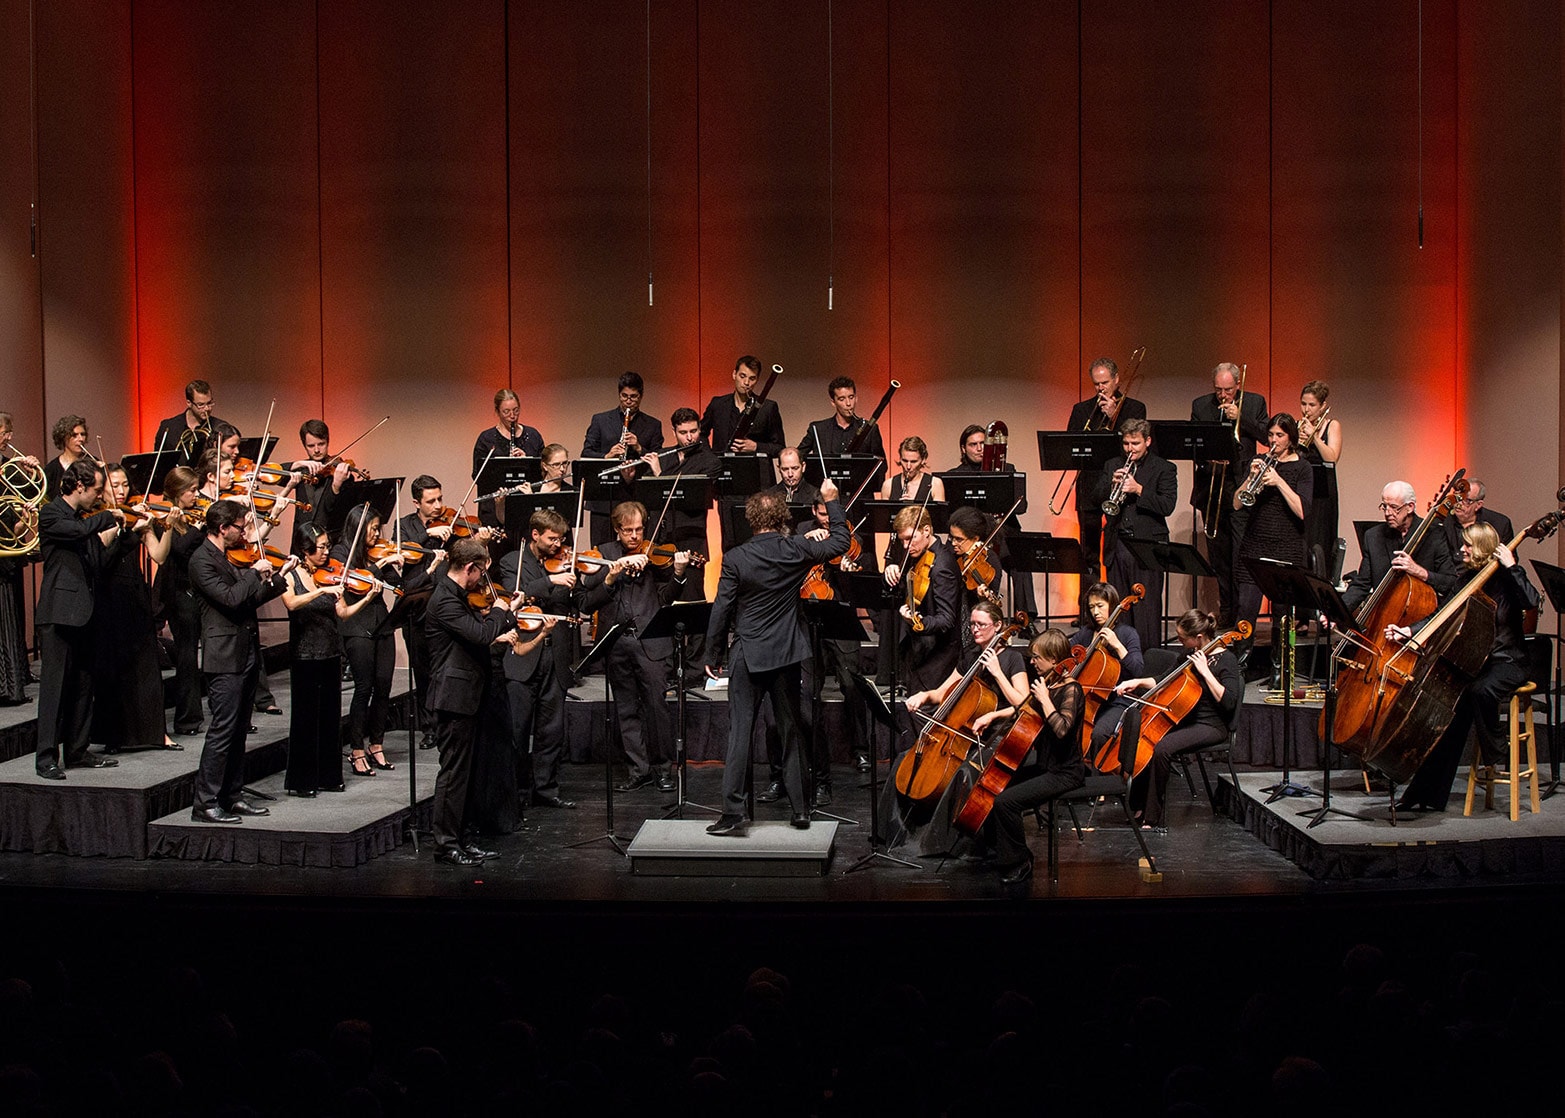 Mercury: The Orchestra Redefined performing in the Bayou Theater. Photo courtesy of the Bayou Theater.